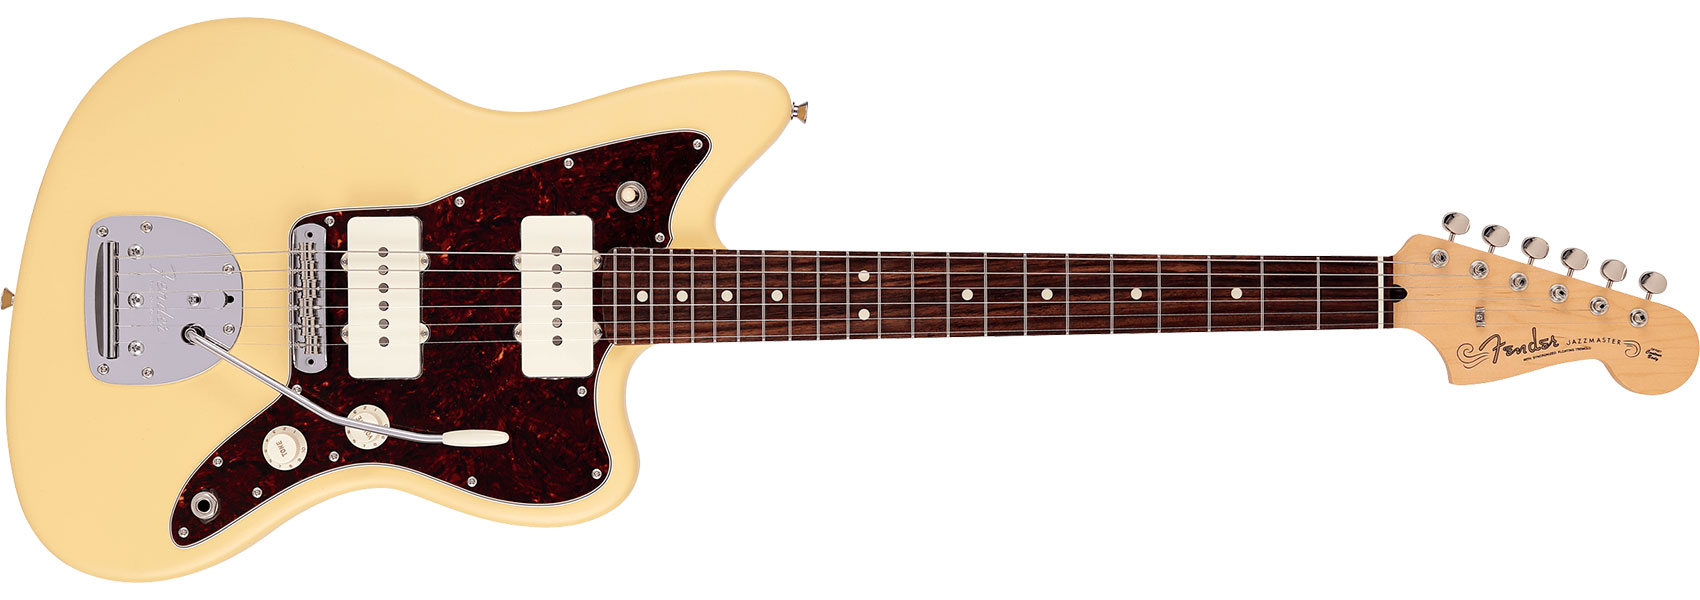 Fender Made in Japan Junior collection